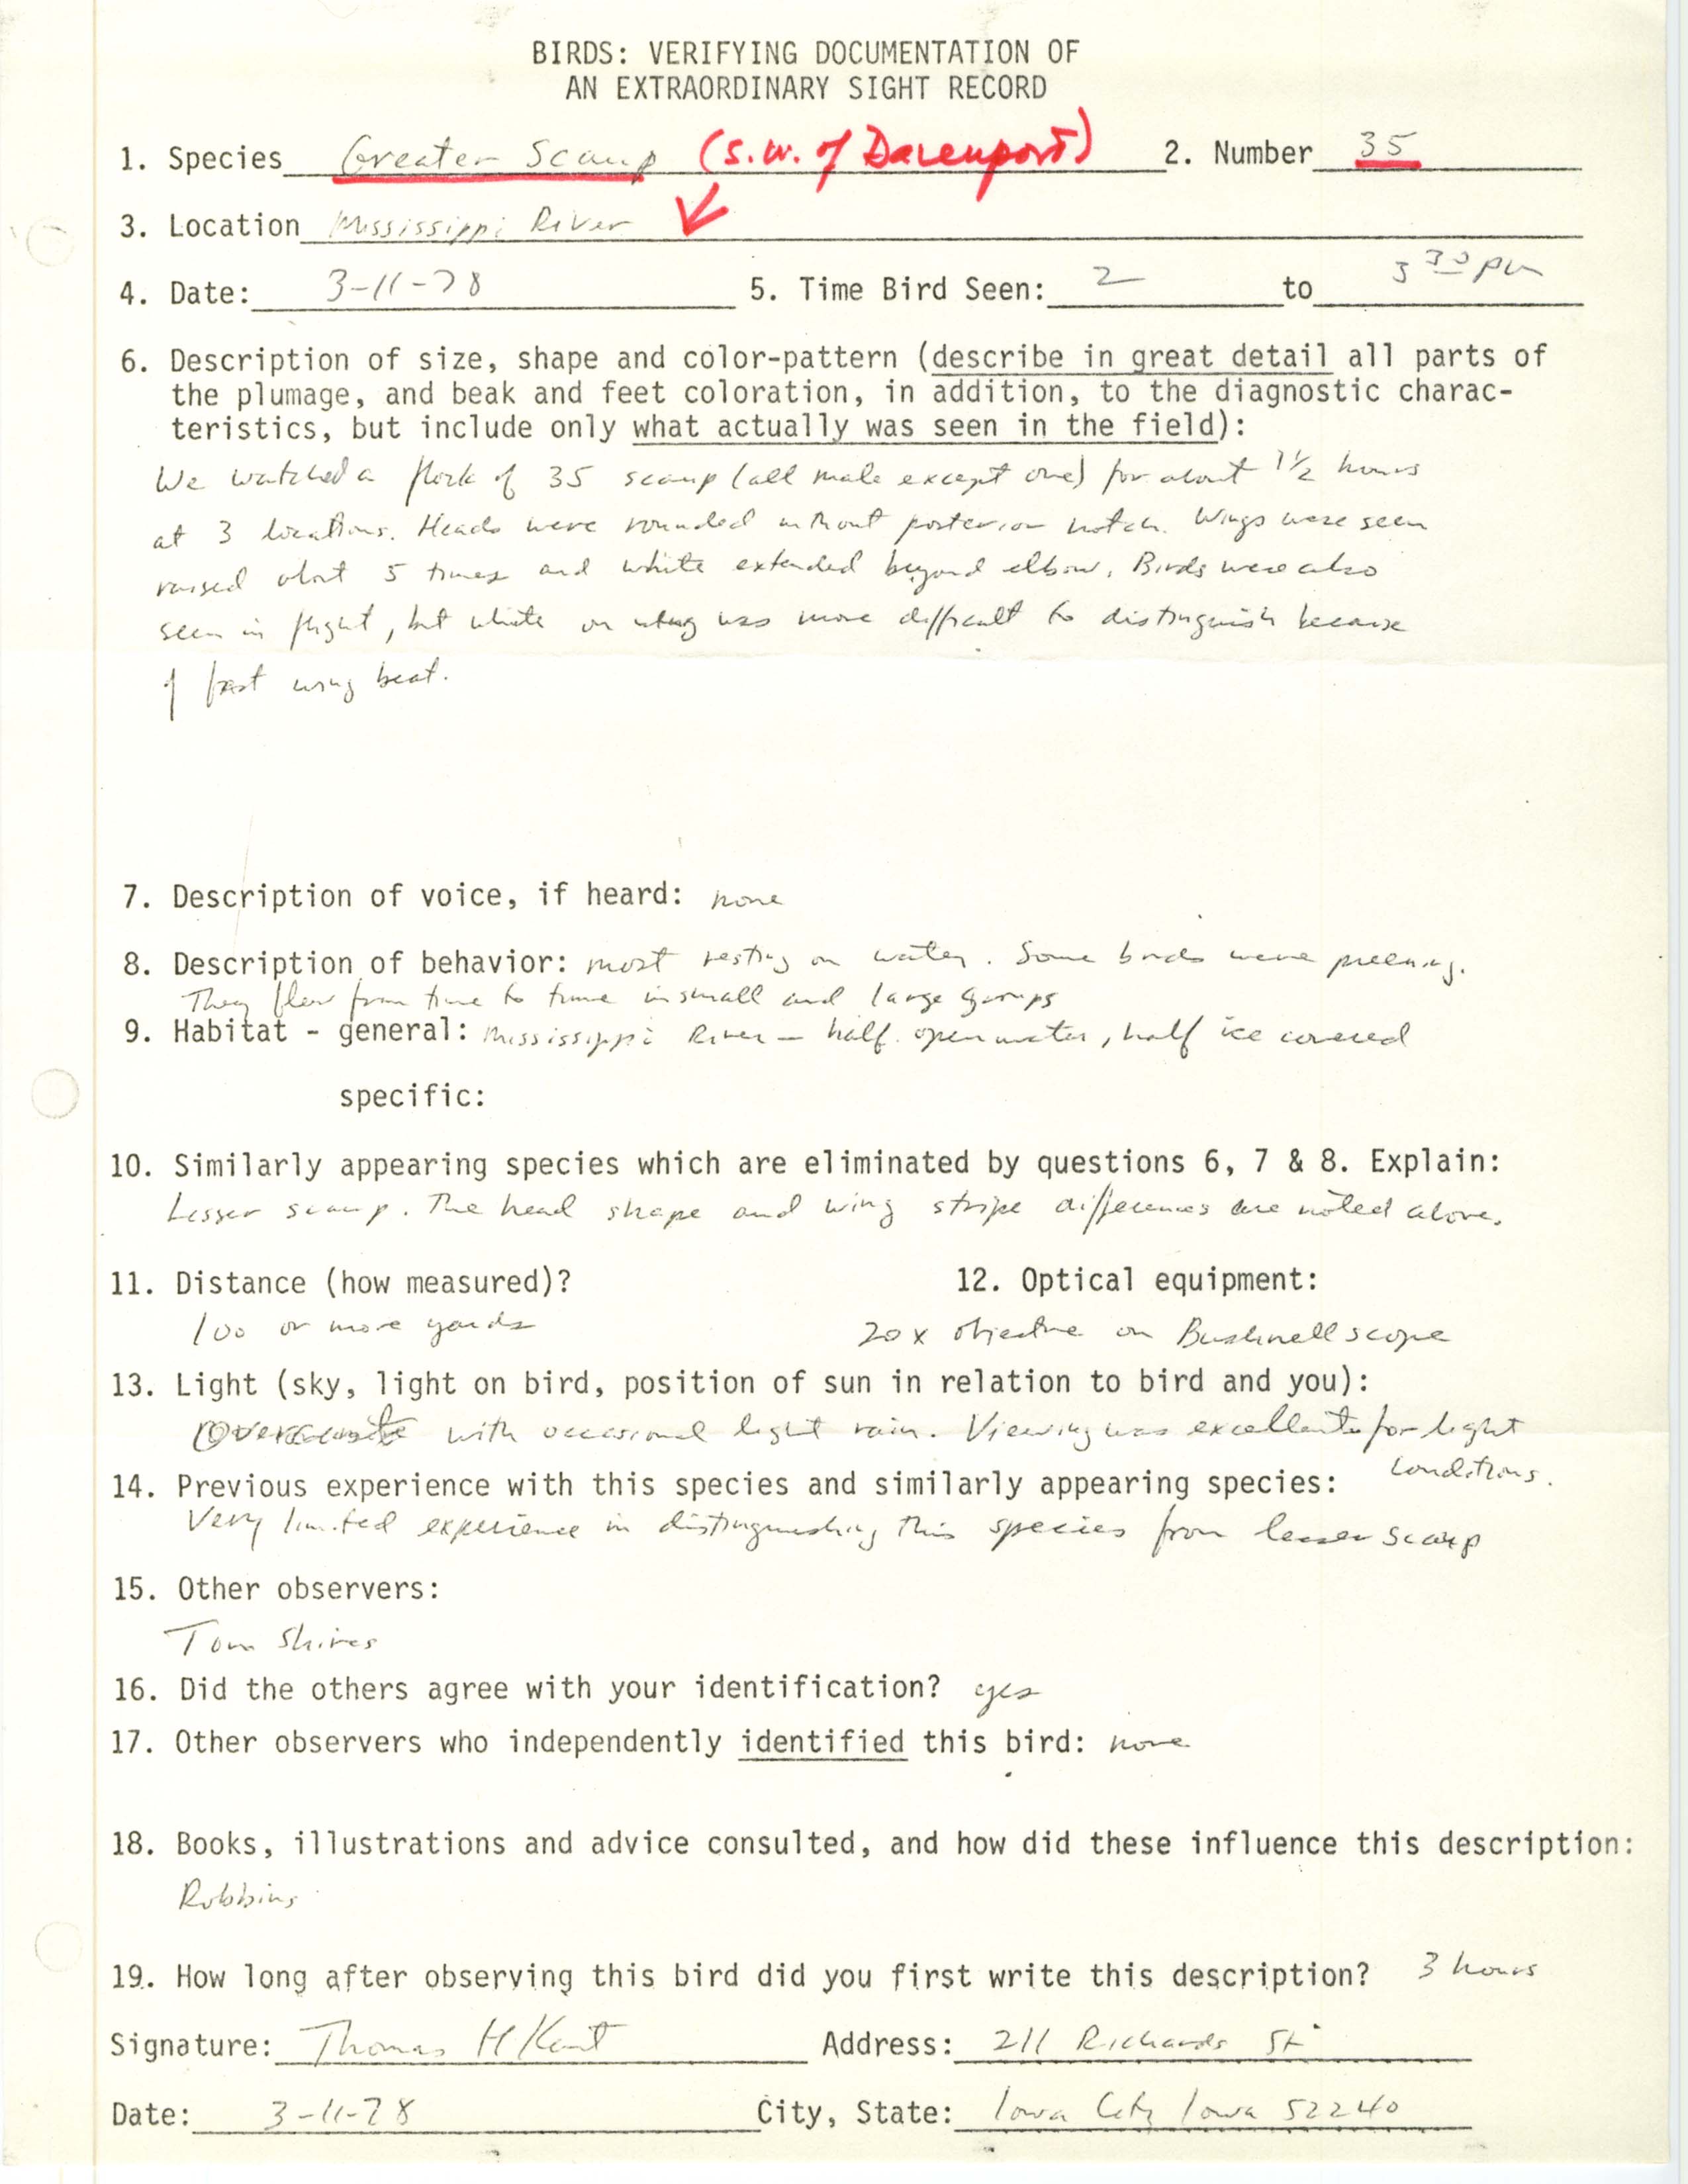 Rare bird documentation form for Greater Scaup at Mississippi River, SW of Davenport, 1978